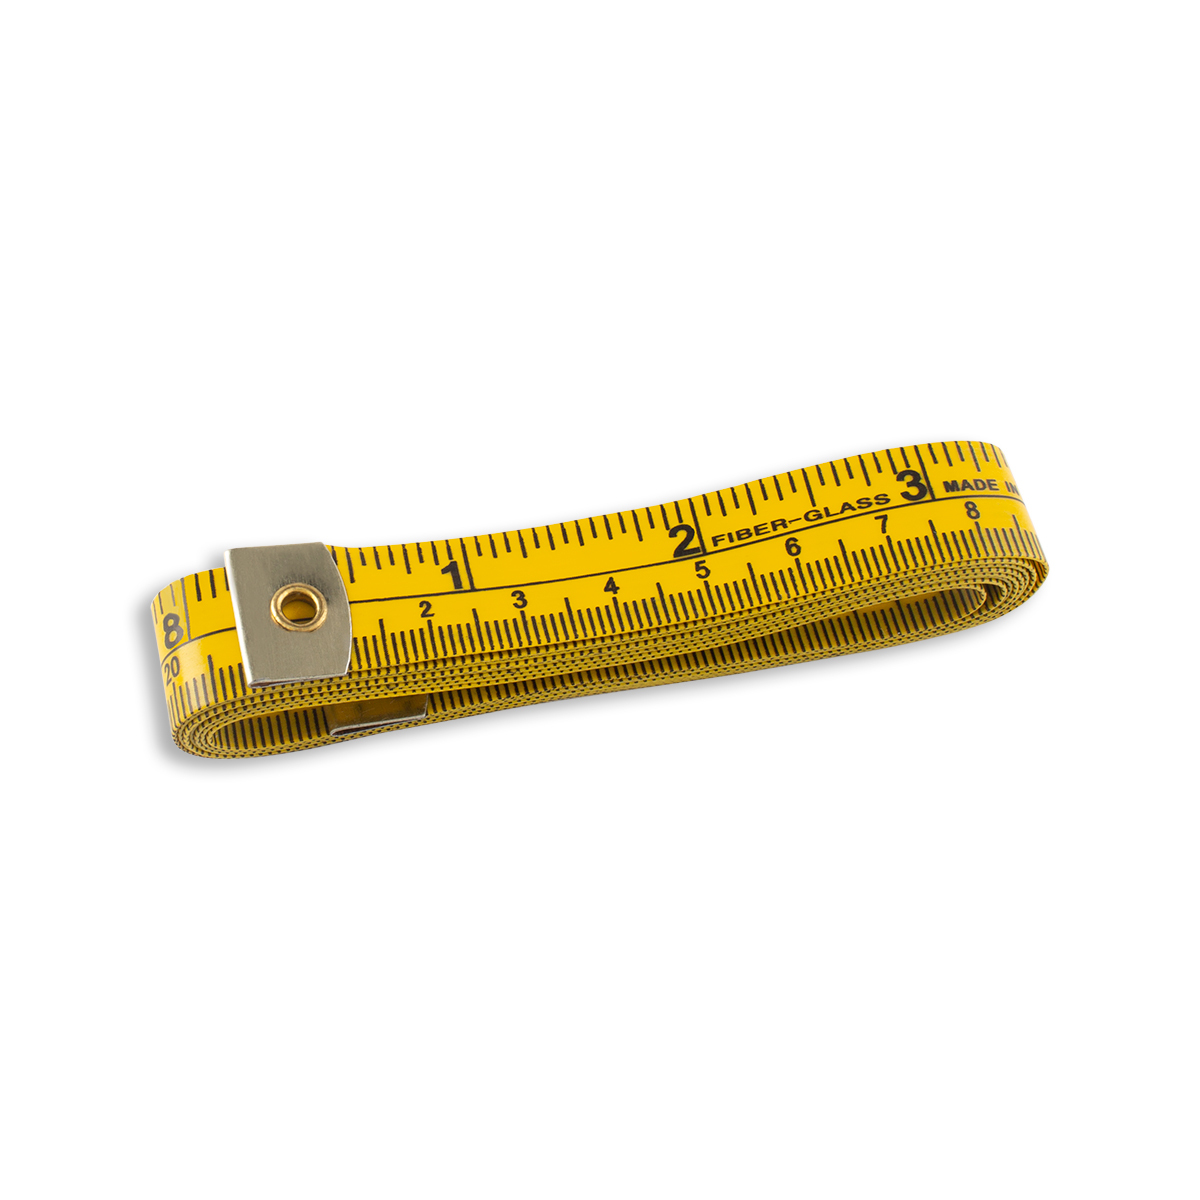 The Best Sewing Tape Measures in 2022